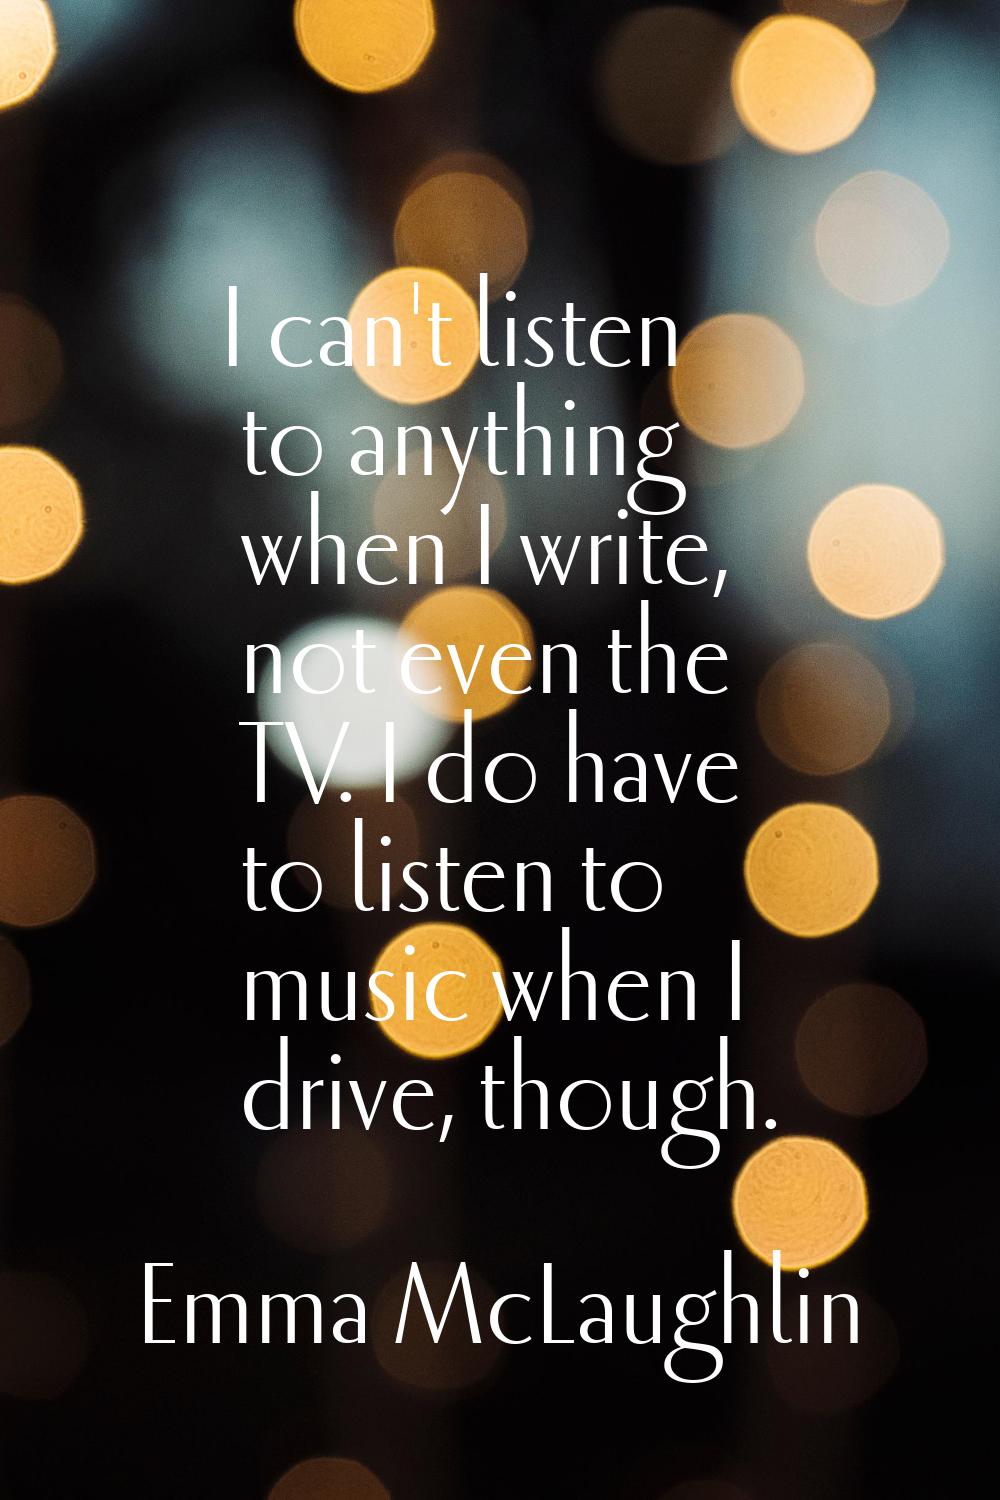 I can't listen to anything when I write, not even the TV. I do have to listen to music when I drive